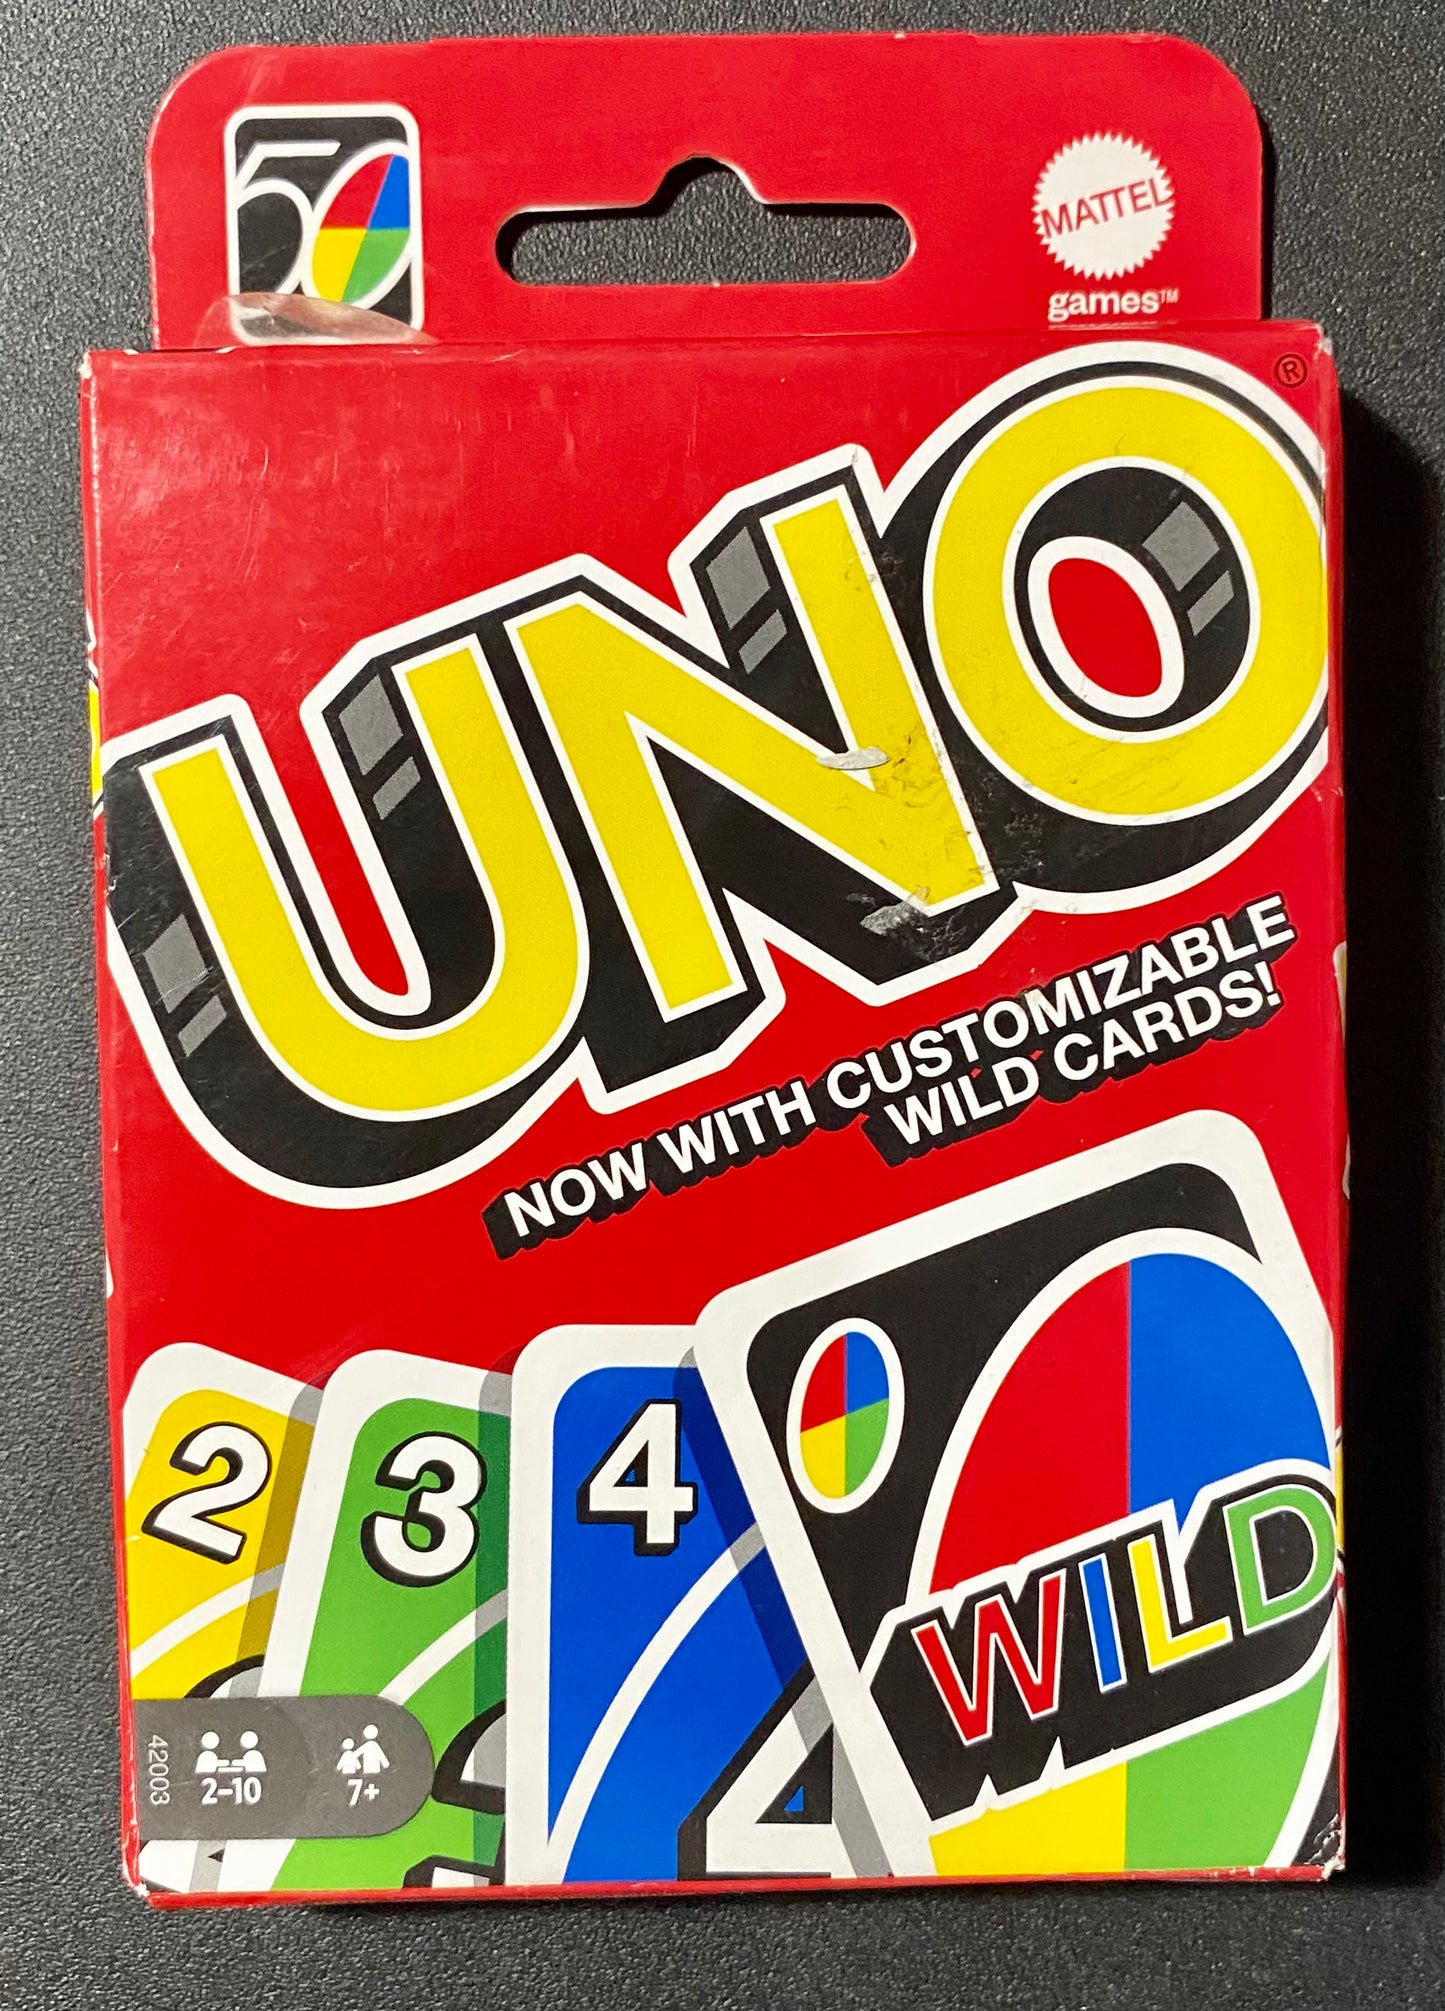 UNO Color & Number Matching Card Game 02001